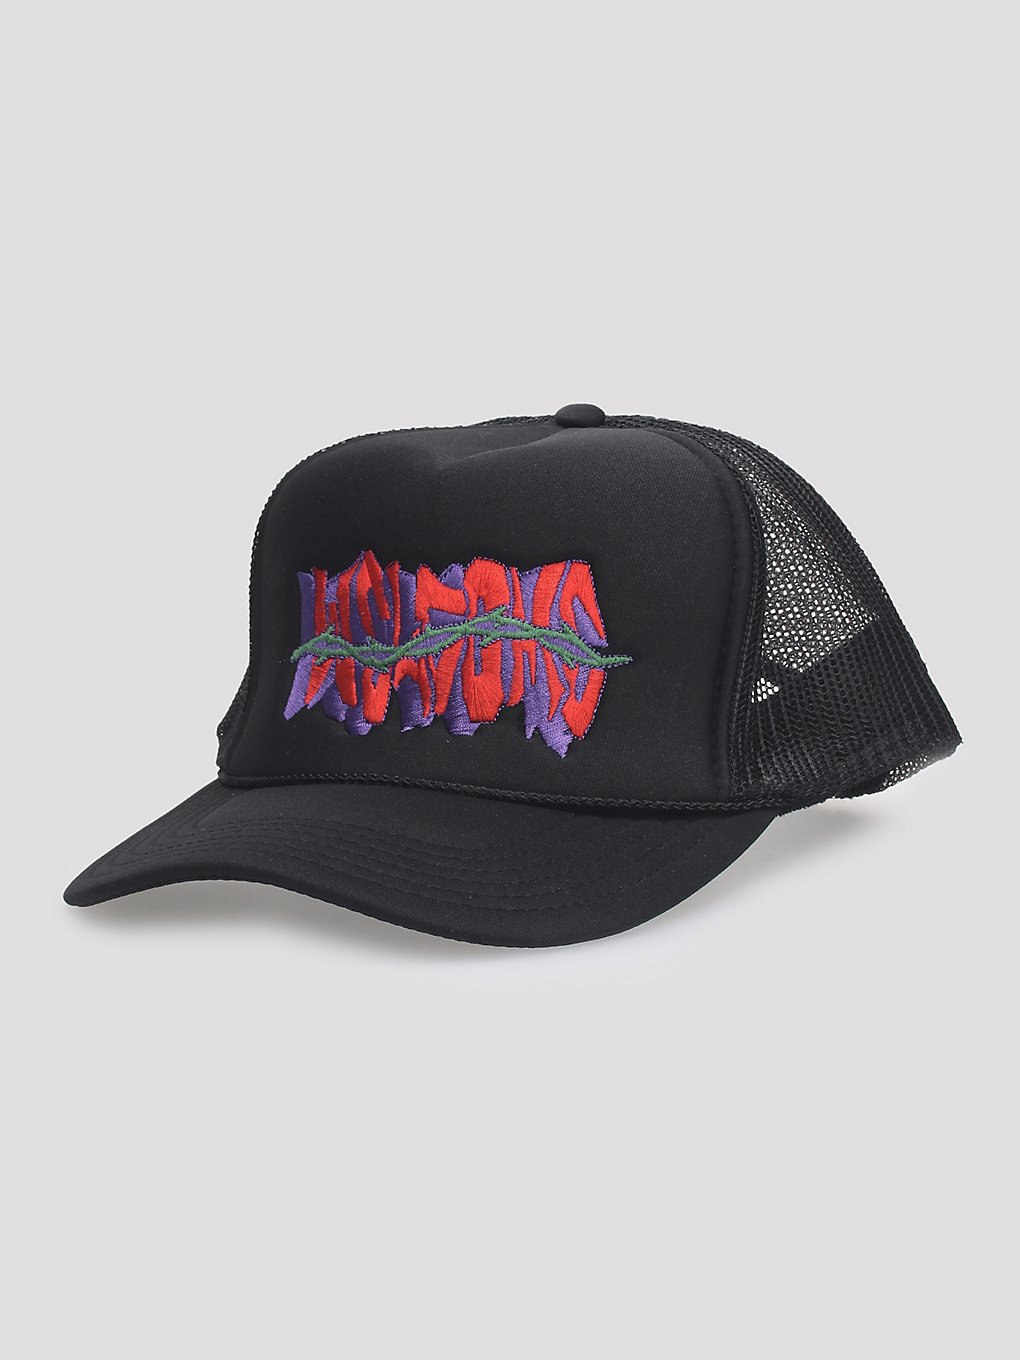 Welcome Thorns Embroidered Cap black kaufen